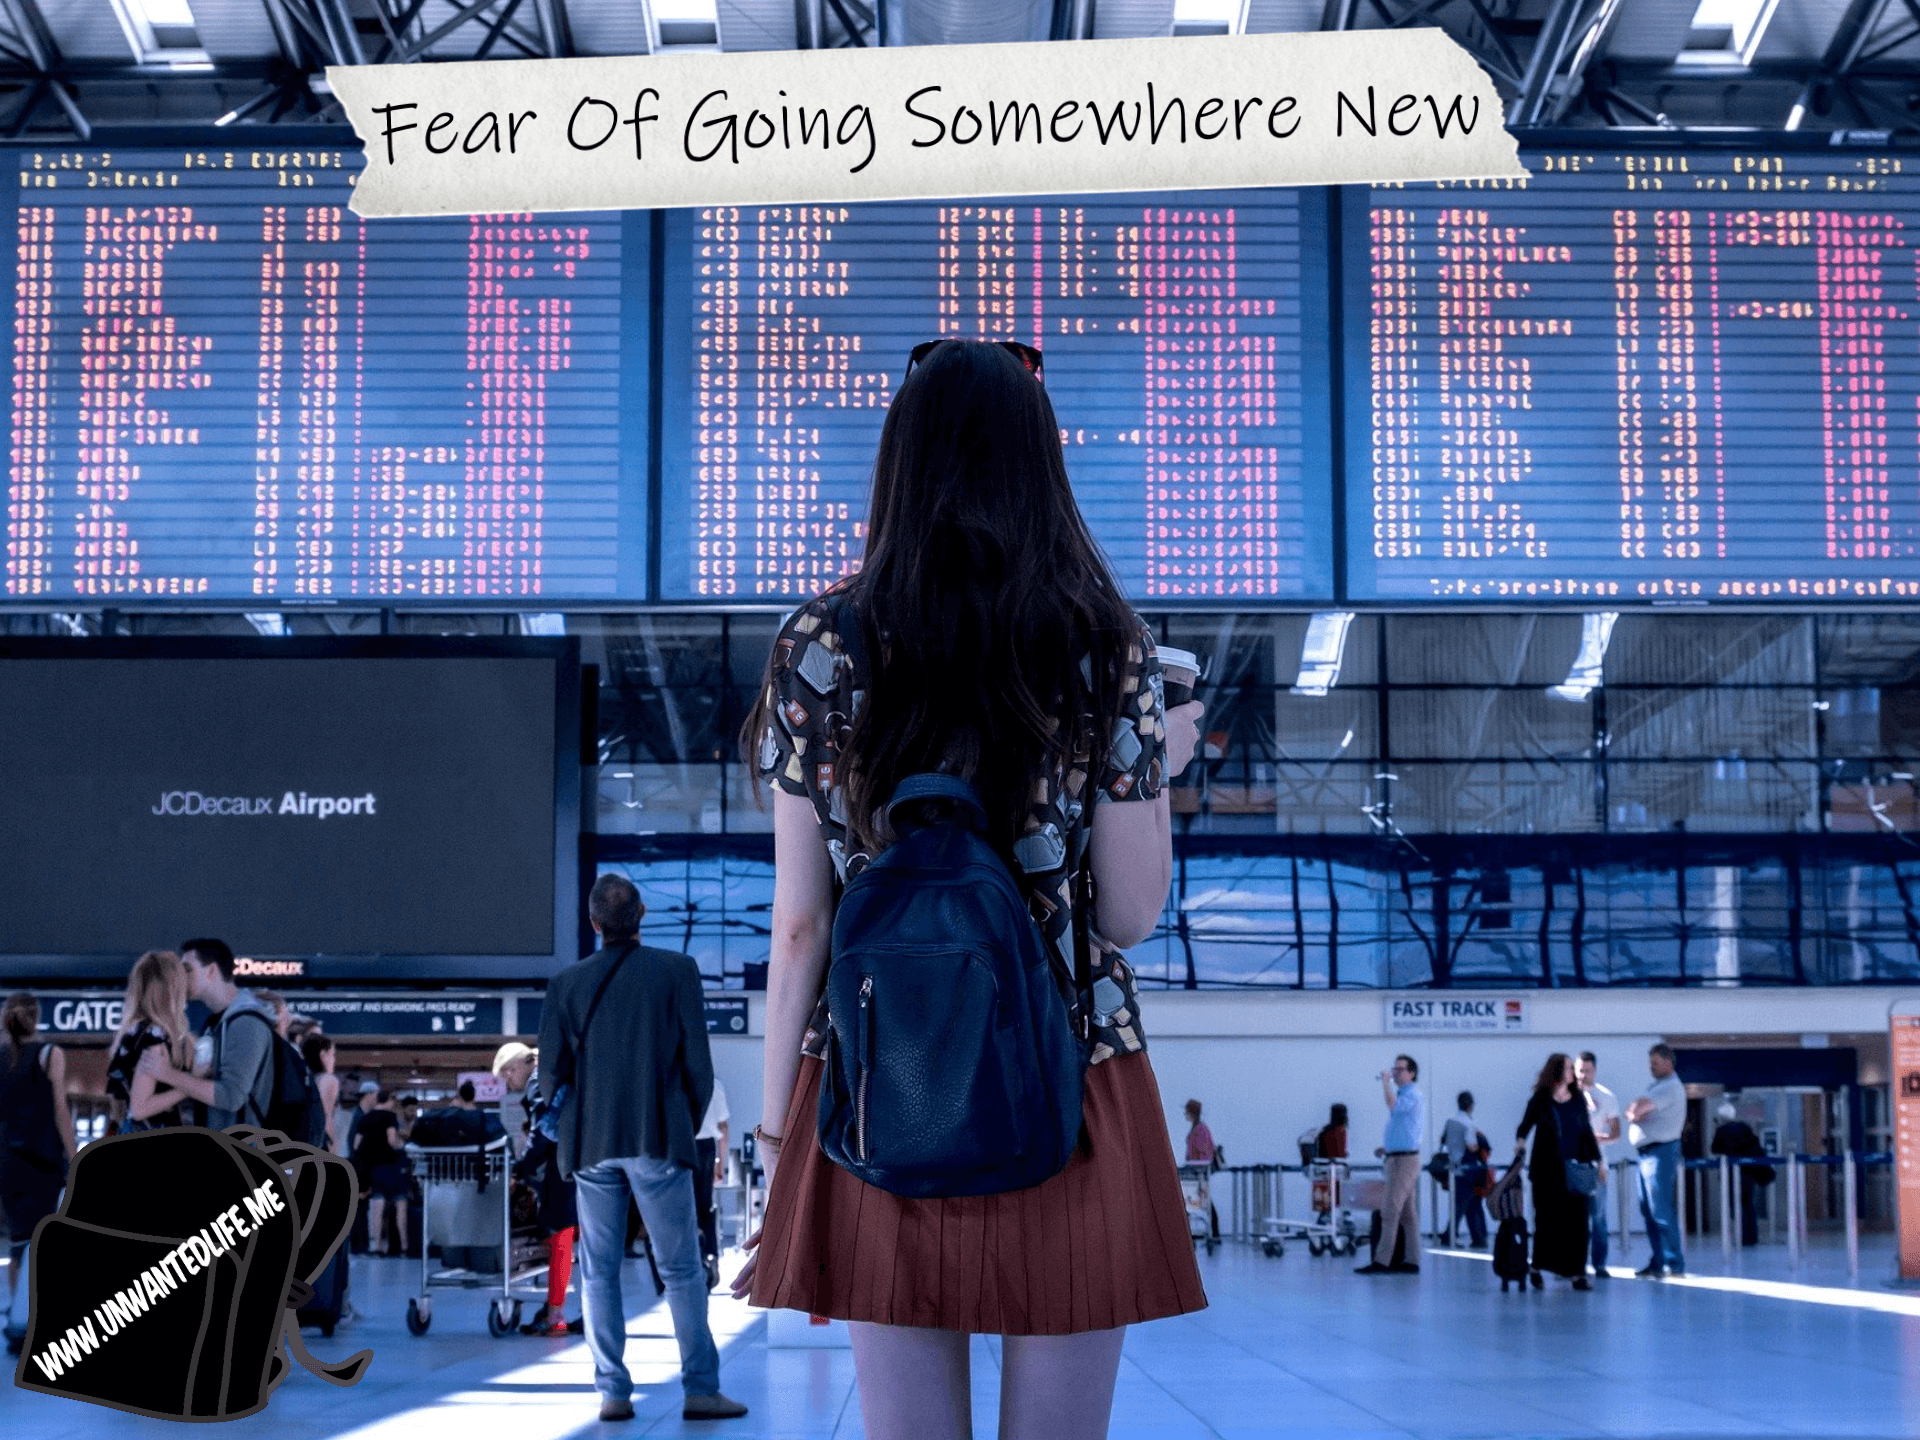 A young woman with her back to the viewer of the image, looking up as a train station arrivals board. The title of the article - Fear Of Going Somewhere New - is across the top of the image